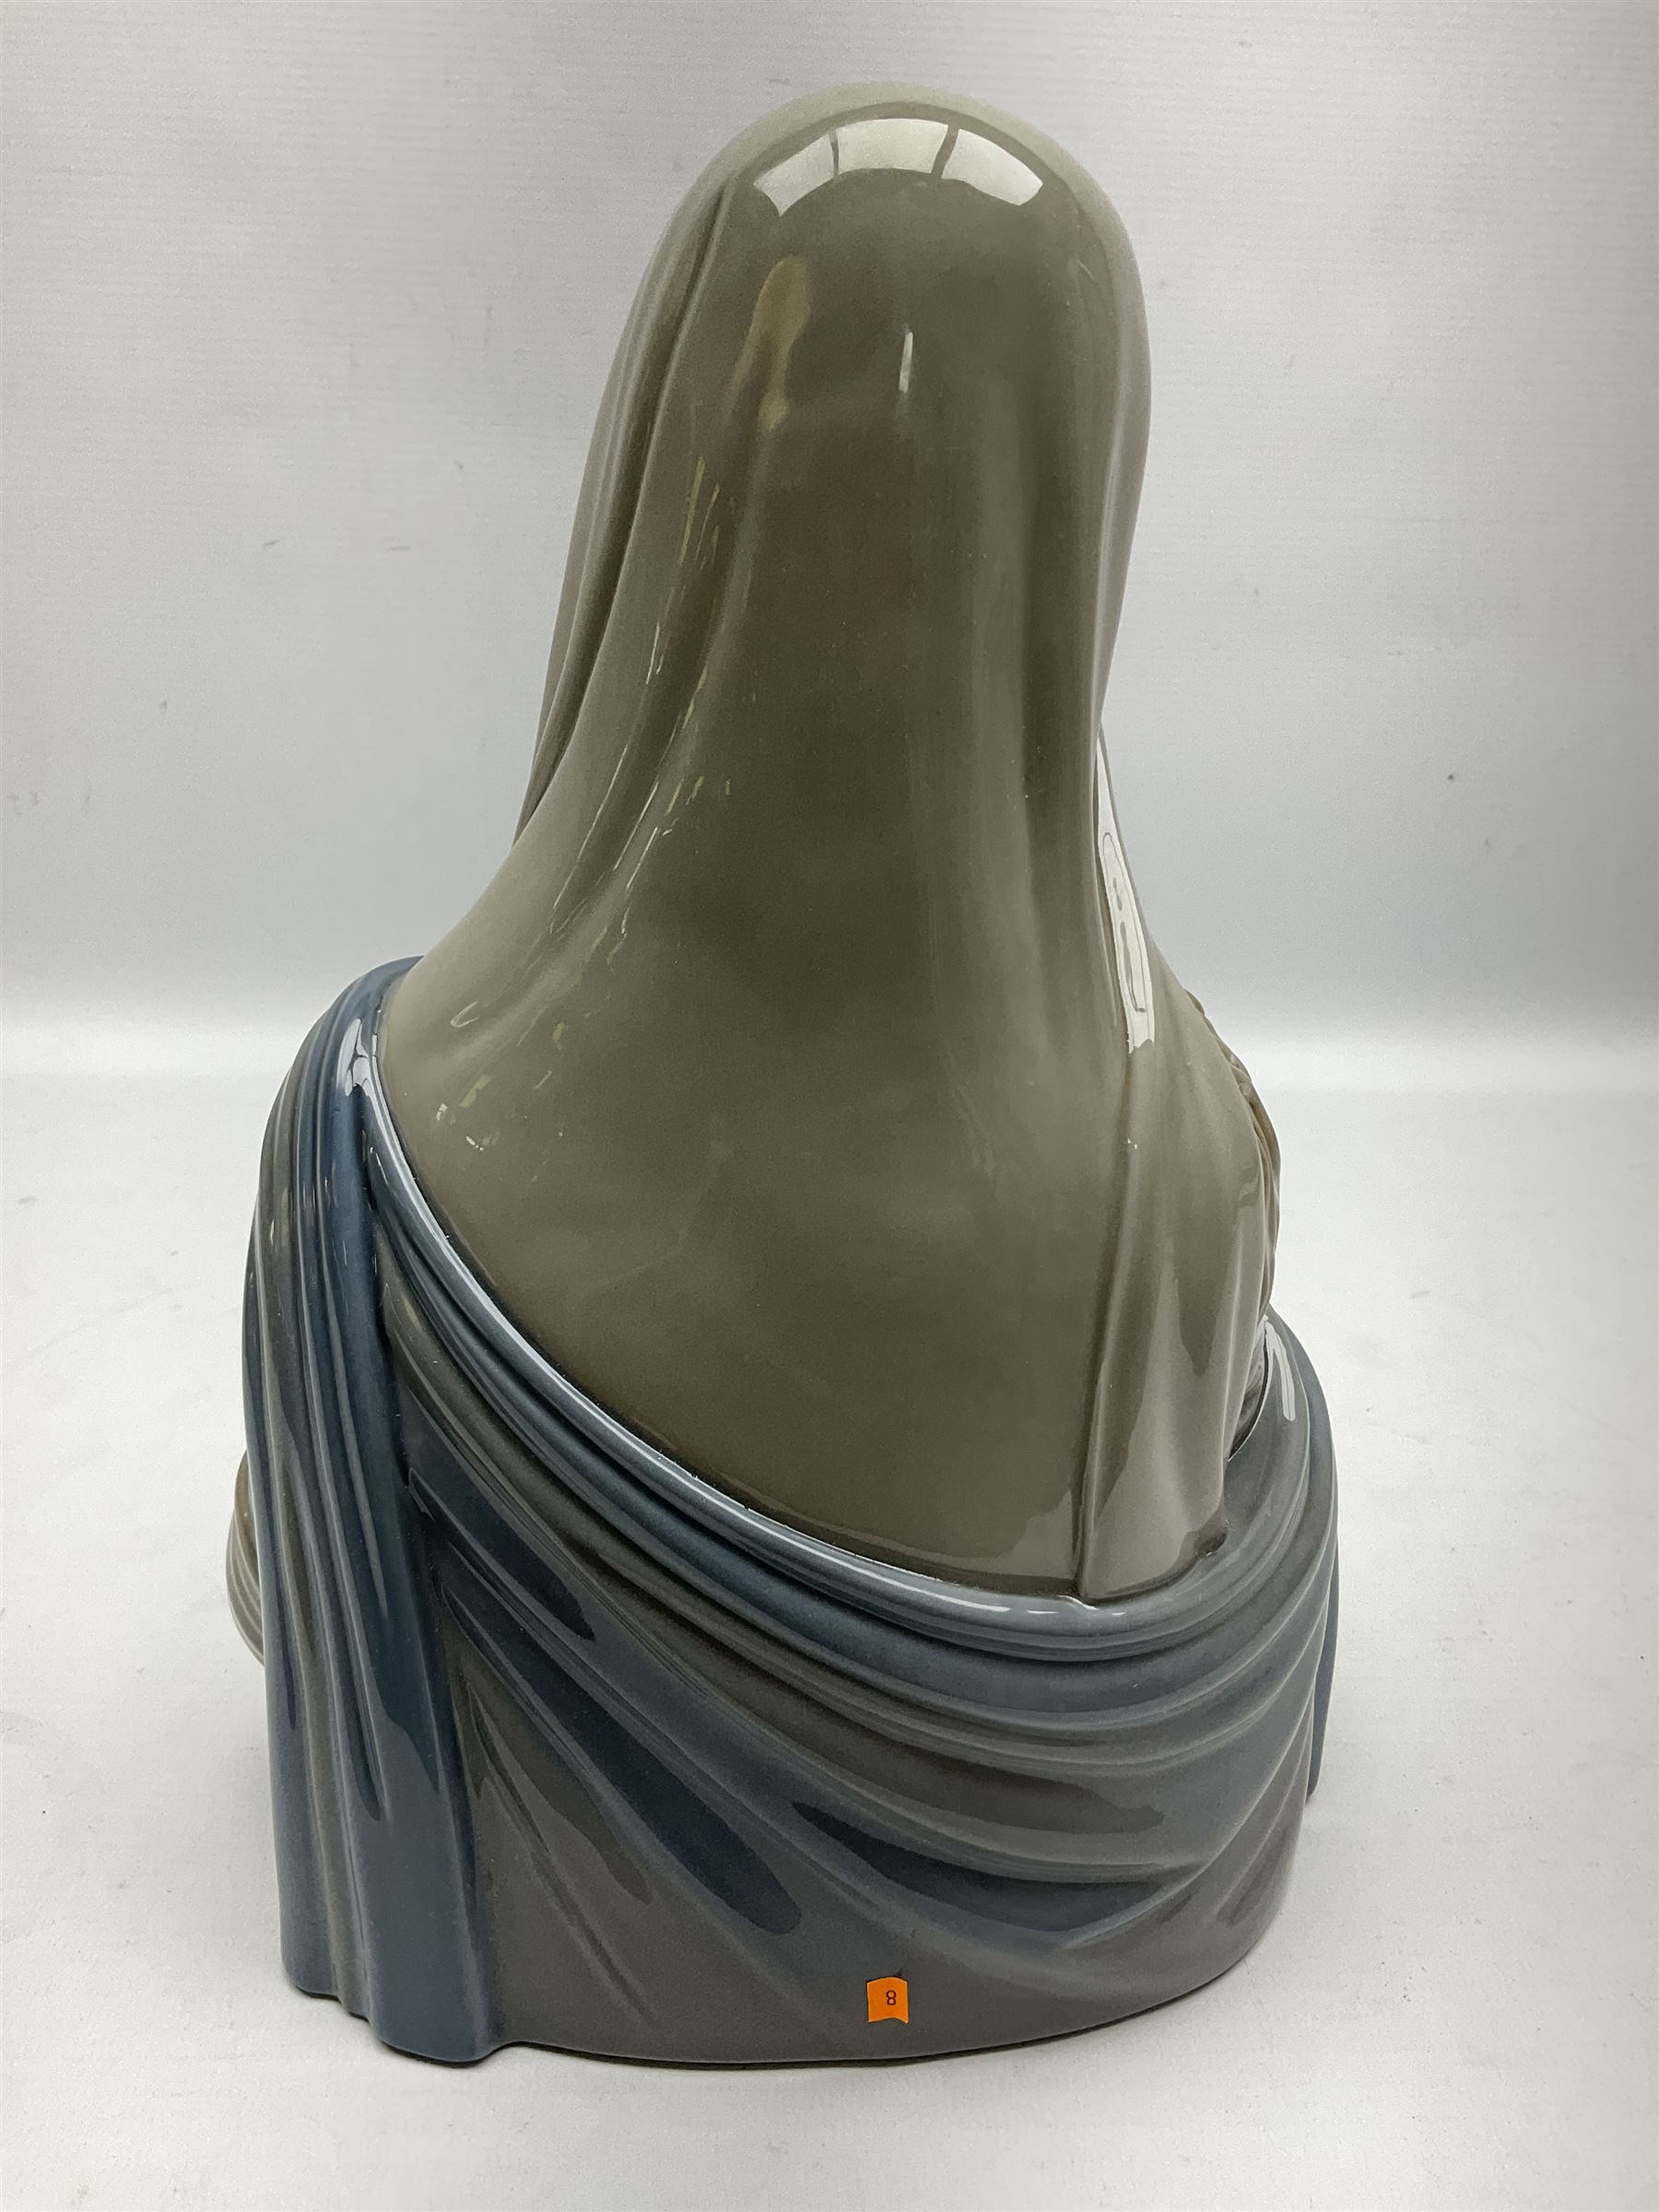 Lladro bust - Image 2 of 9